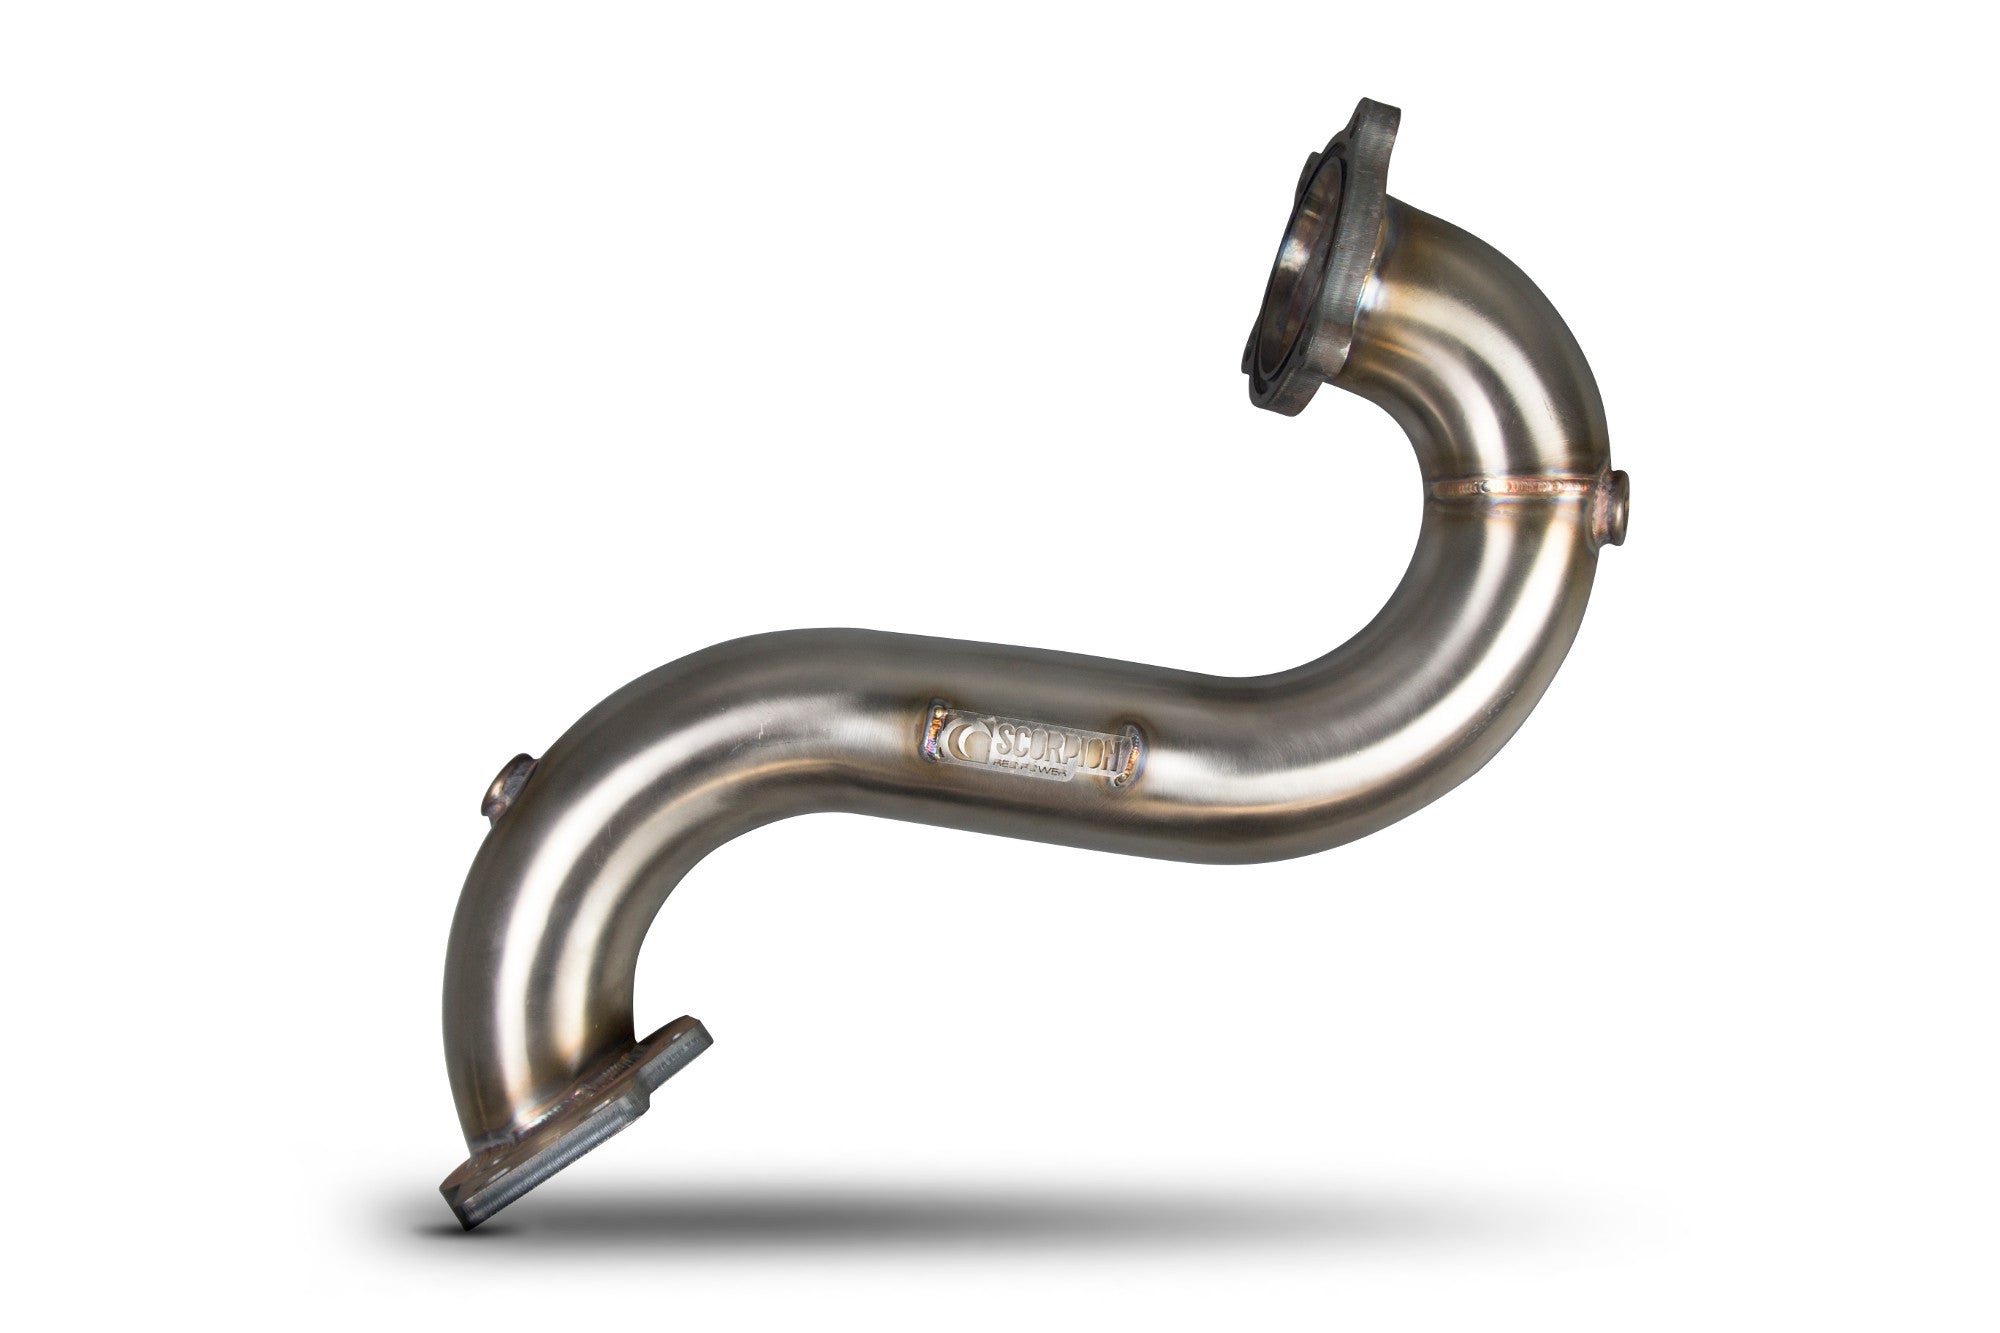 Vauxhall Astra J VXR Downpipe with no catalyst